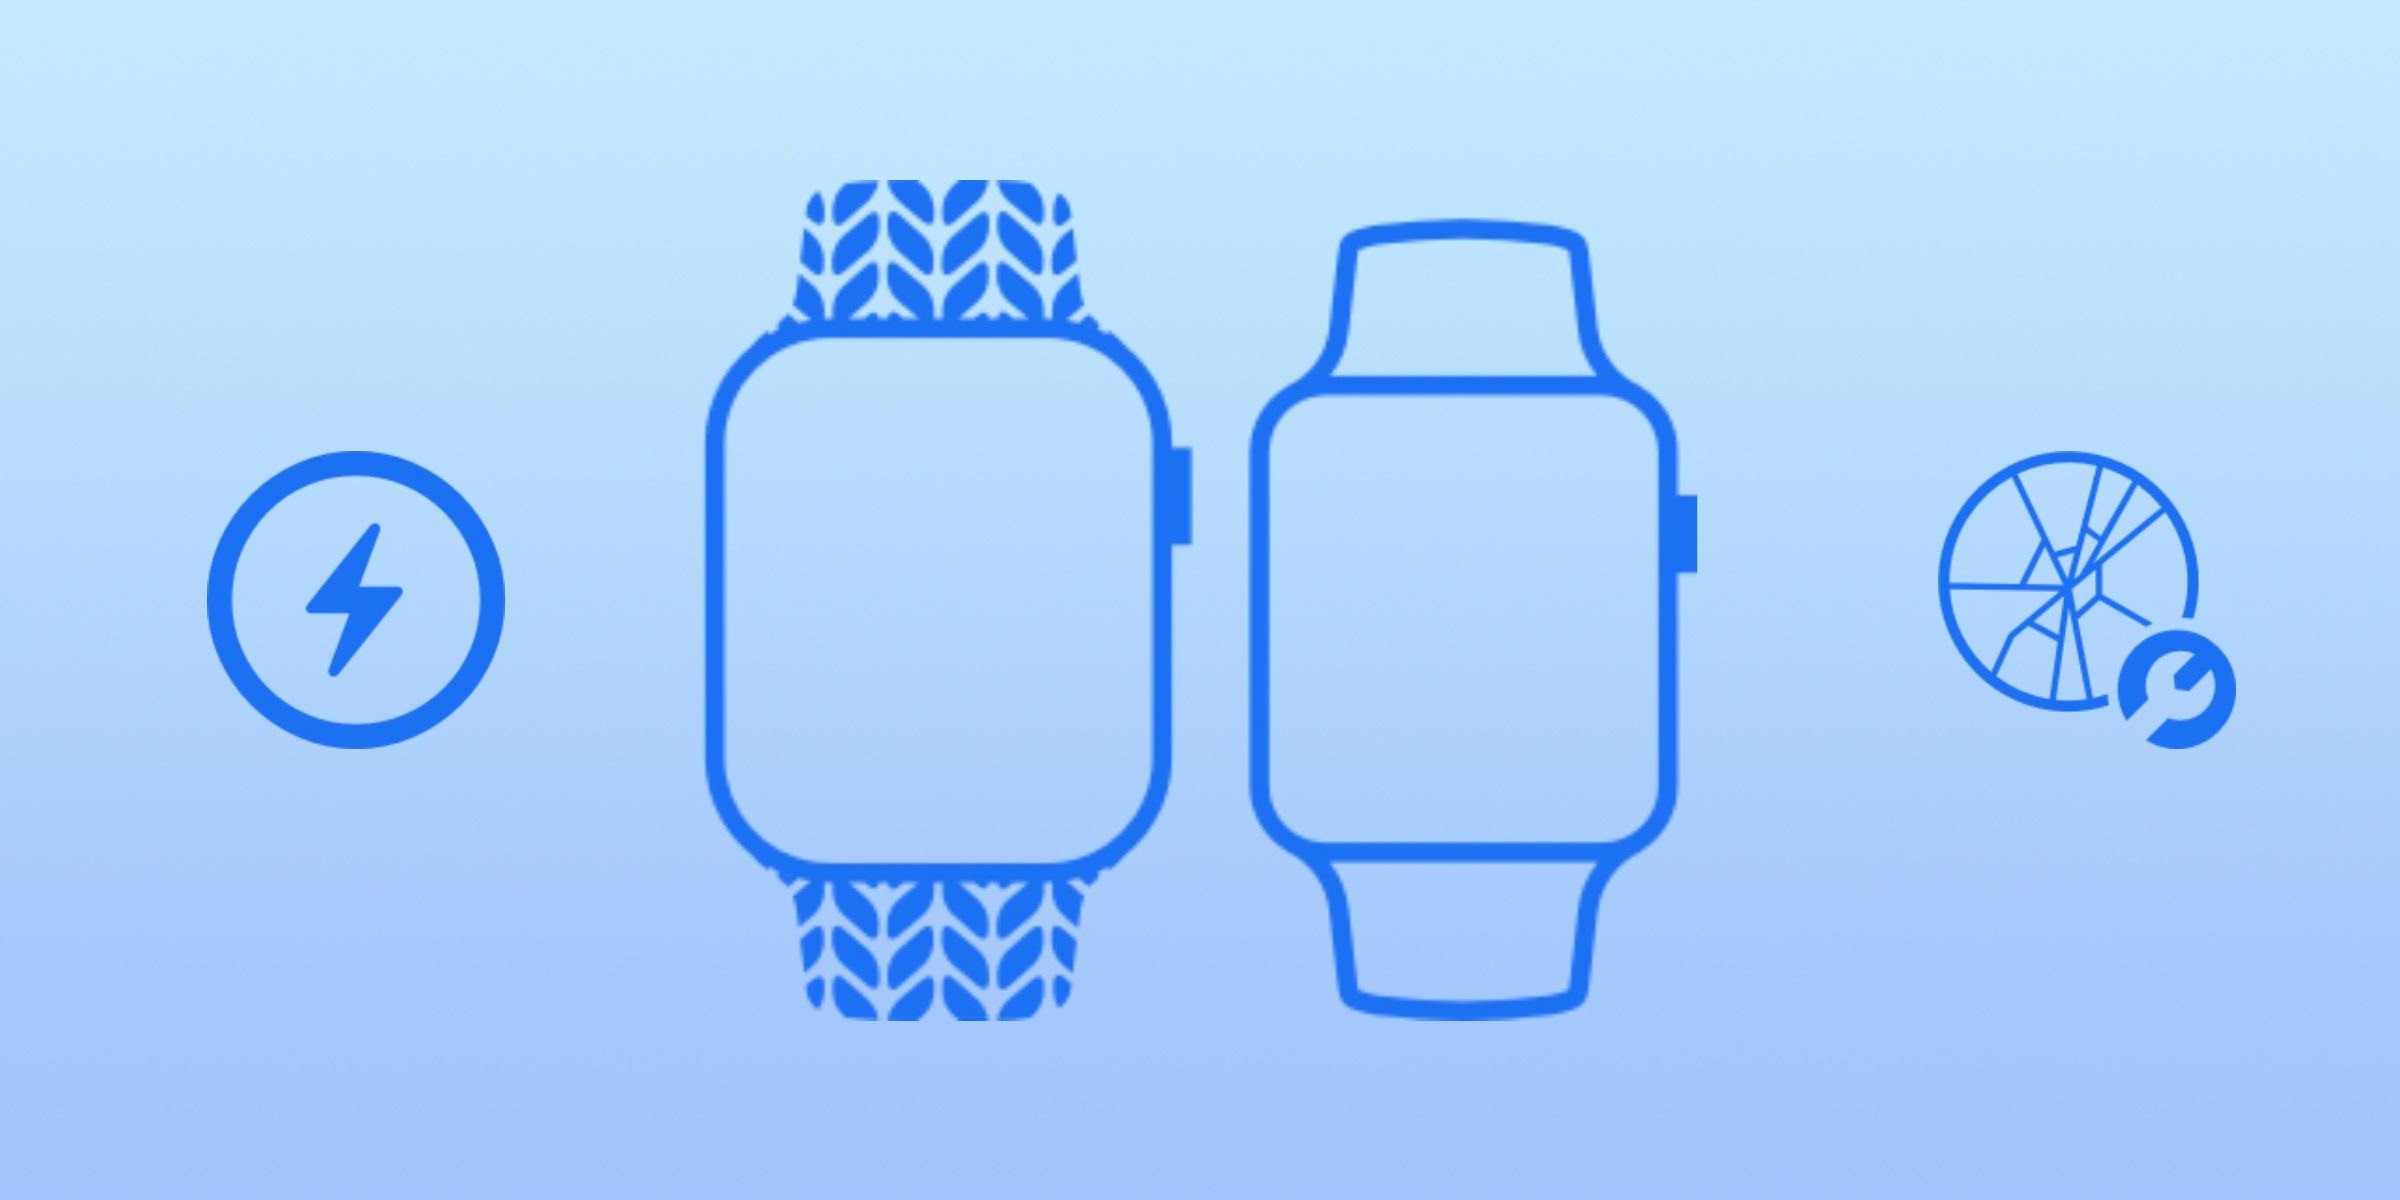 Apple Watch repair icons promoting screen replacement and battery replacement services.